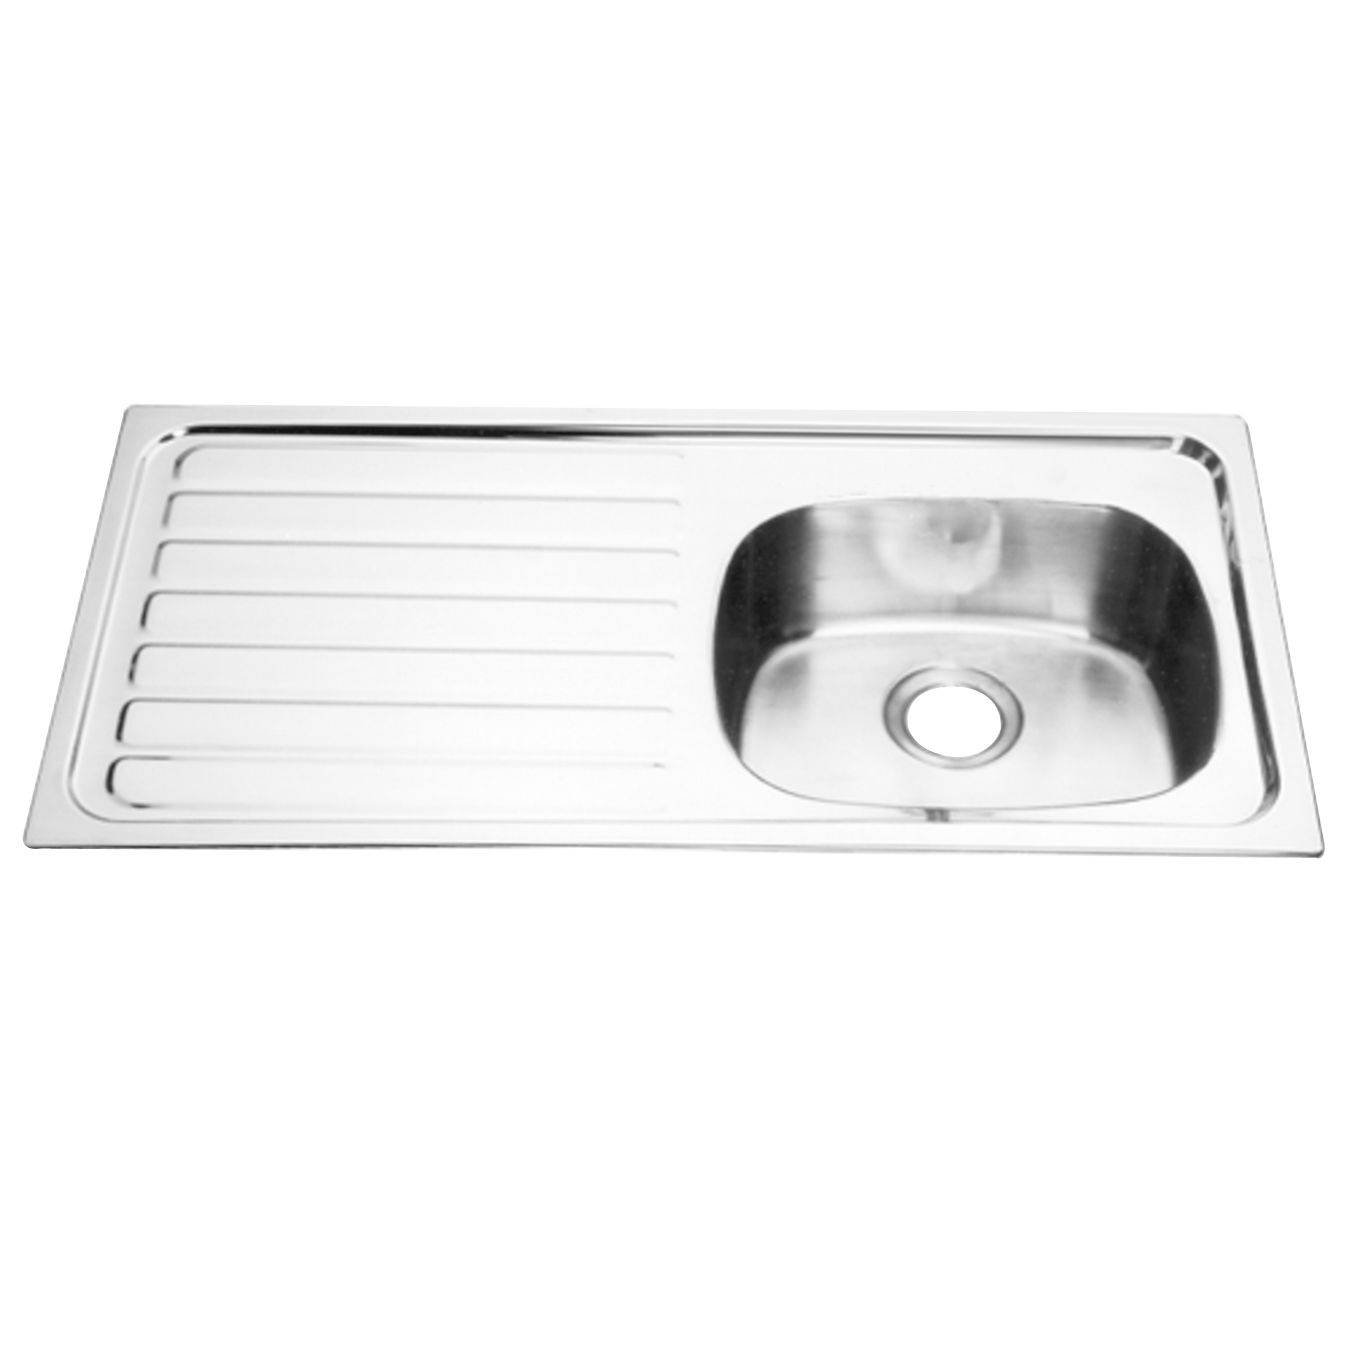 316 Stainless Steel Inset Medical and Laboratory Sinks